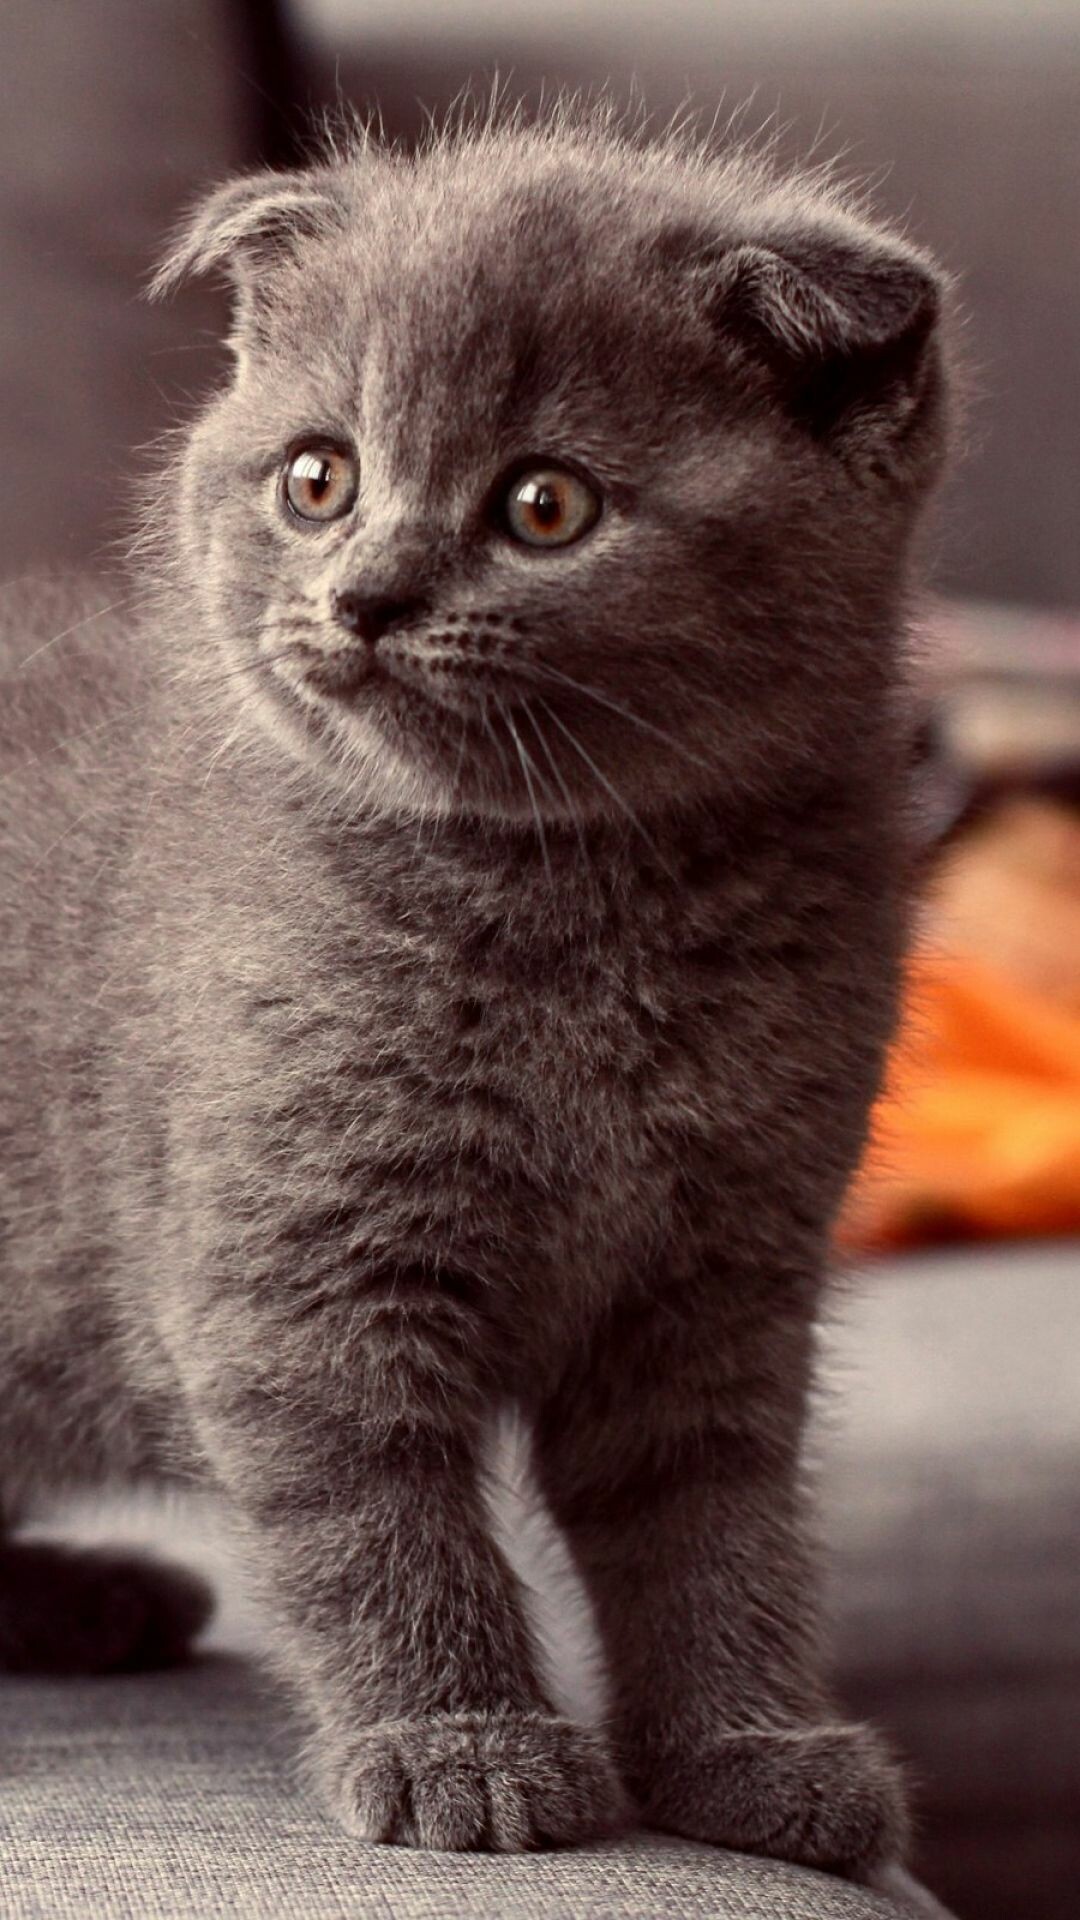 Scottish Fold: A medium-sized compact cat, generally weighing 6-13 pounds. 1080x1920 Full HD Wallpaper.